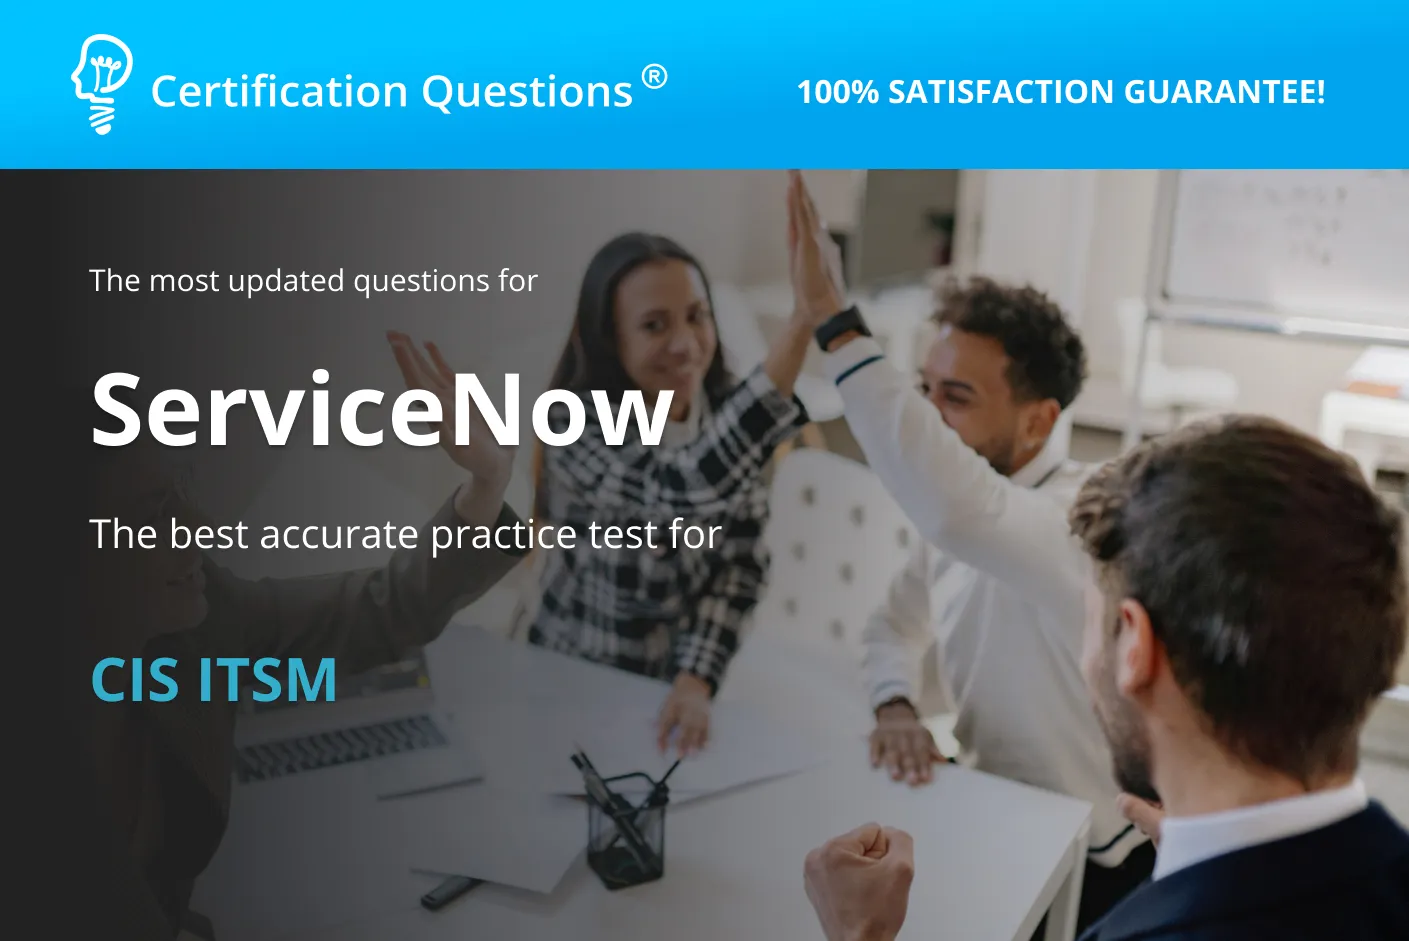 This guide is related to ServiceNow CIS ITSM certification